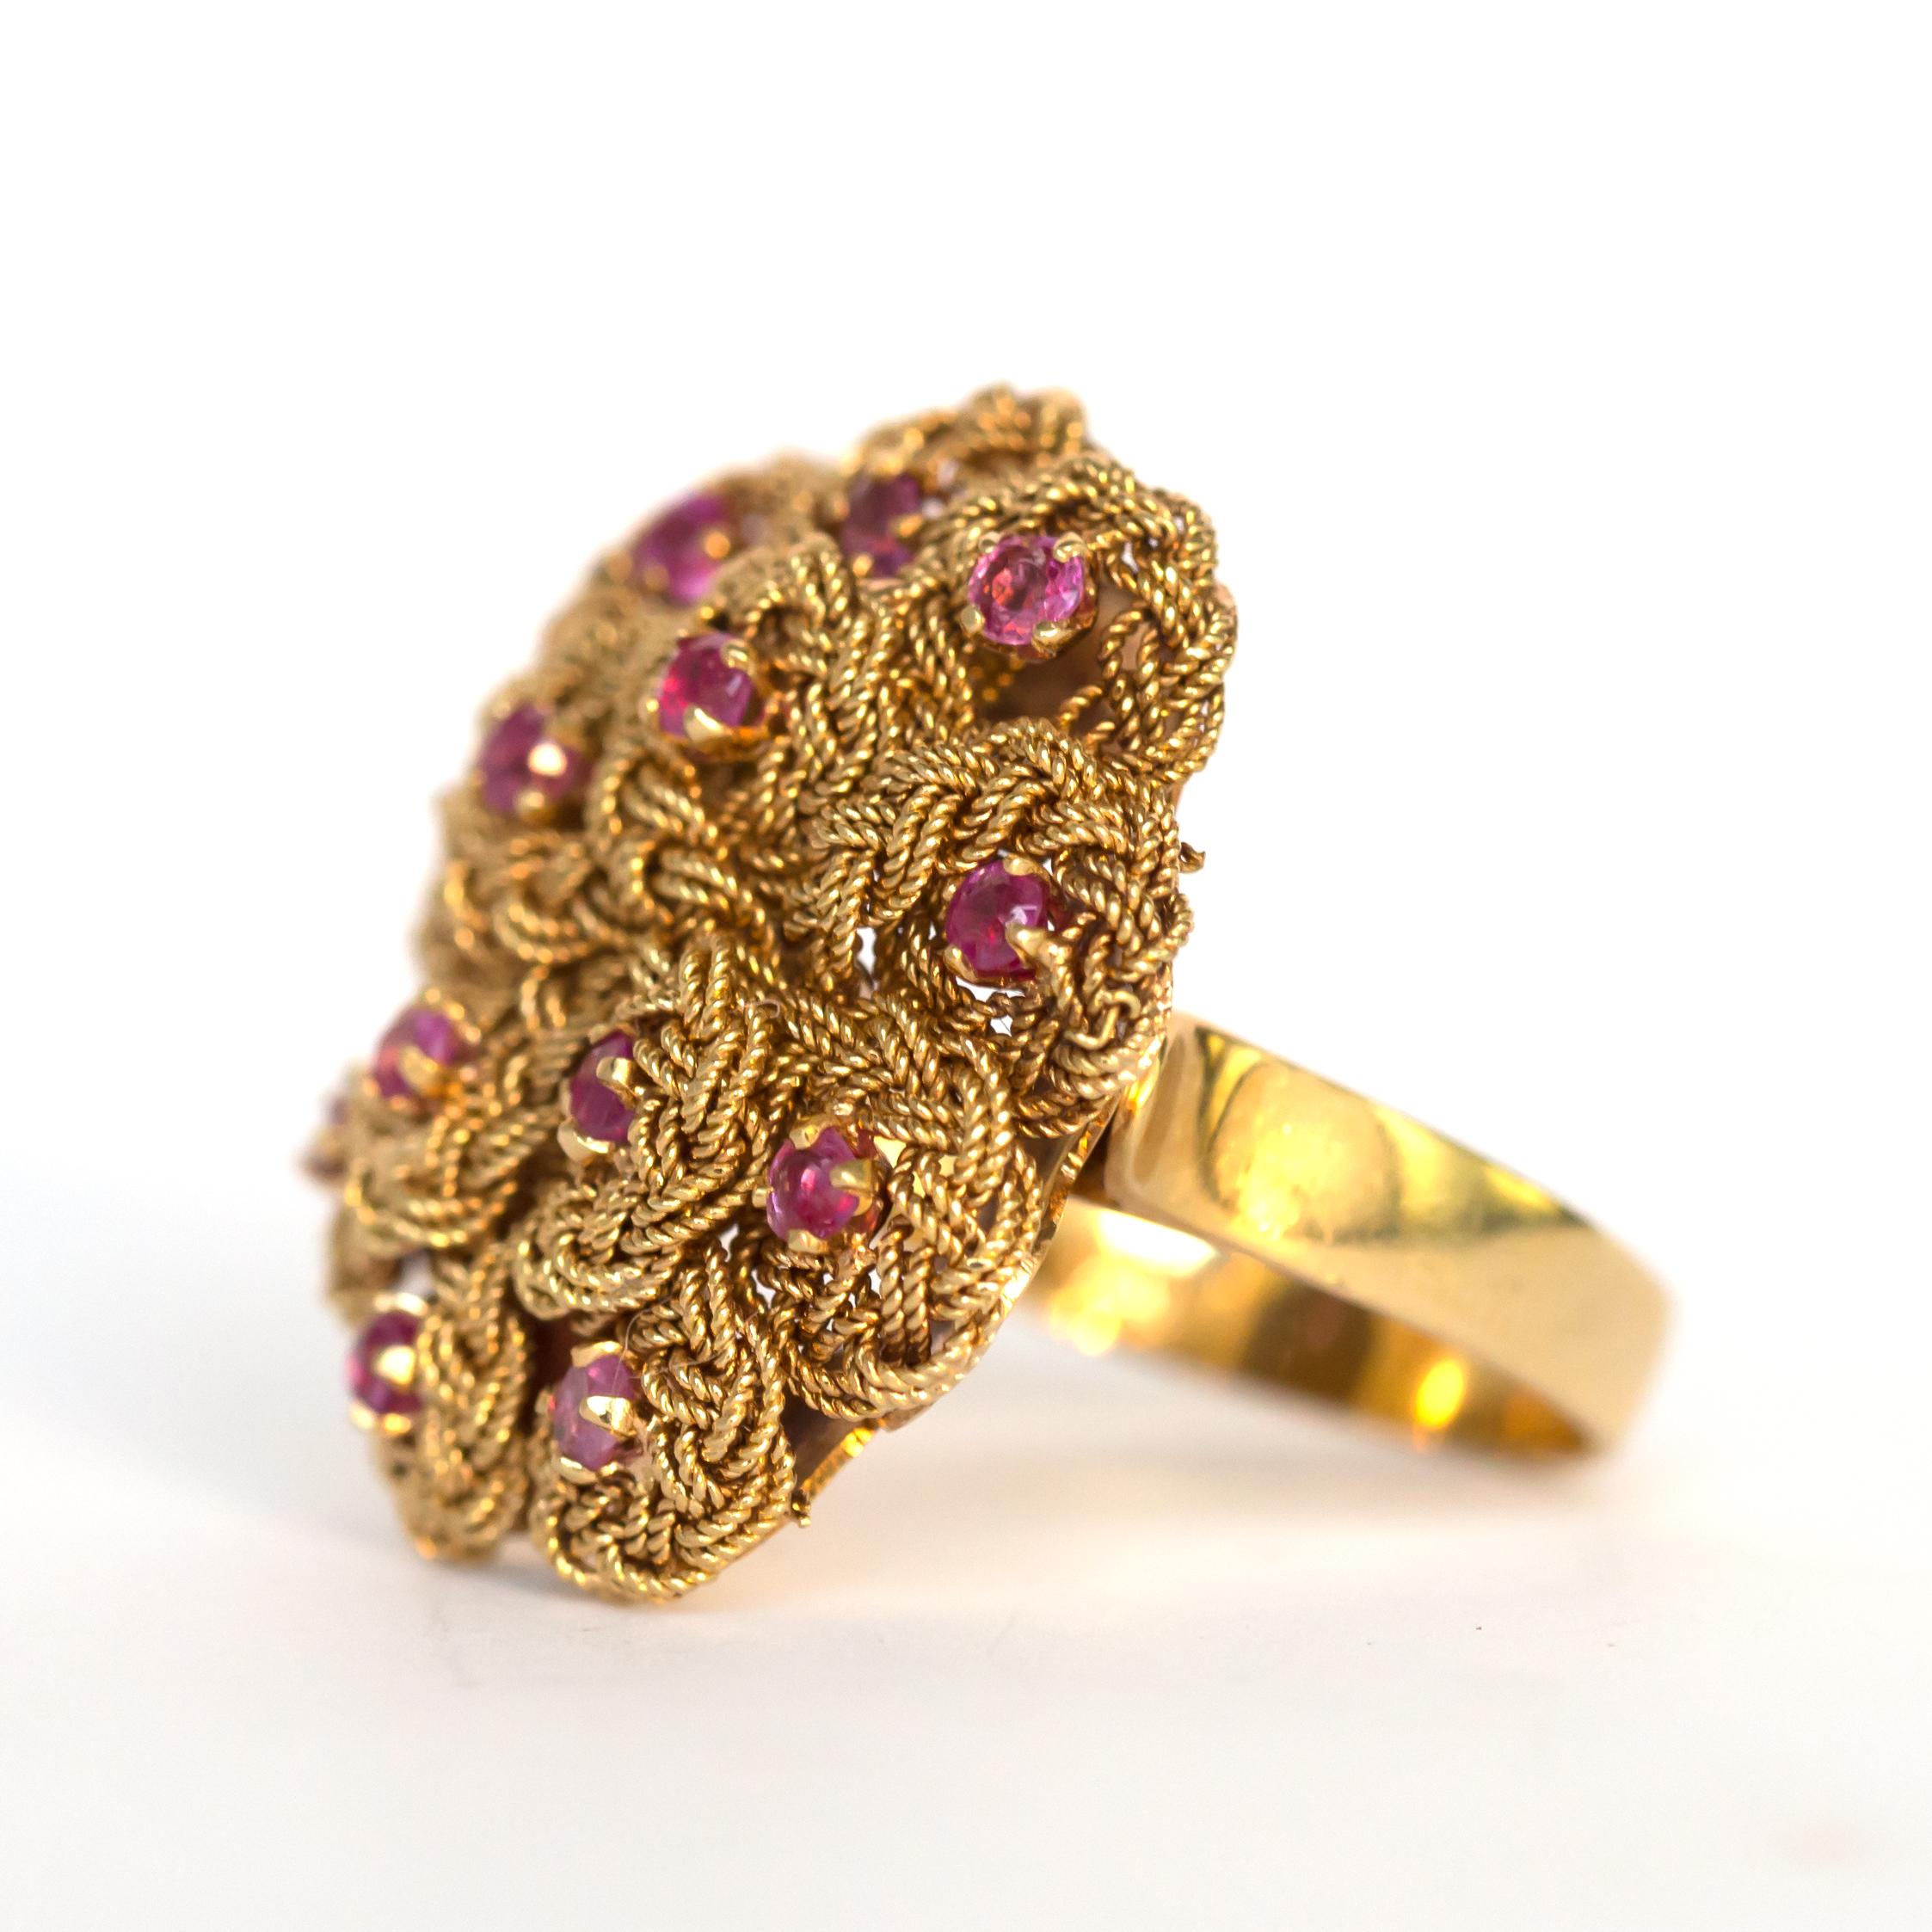 Item Details: 
Ring Size: 6.5
Metal Type: 18 Karat Yellow Gold
Weight: 9.8 grams

Color Stone Details: 
Type: Ruby, Natural
Carat Weight: .25 carat, total weight
Color: Intense Pink-Red

Finger to Top of Stone Measurement: 7.43mm